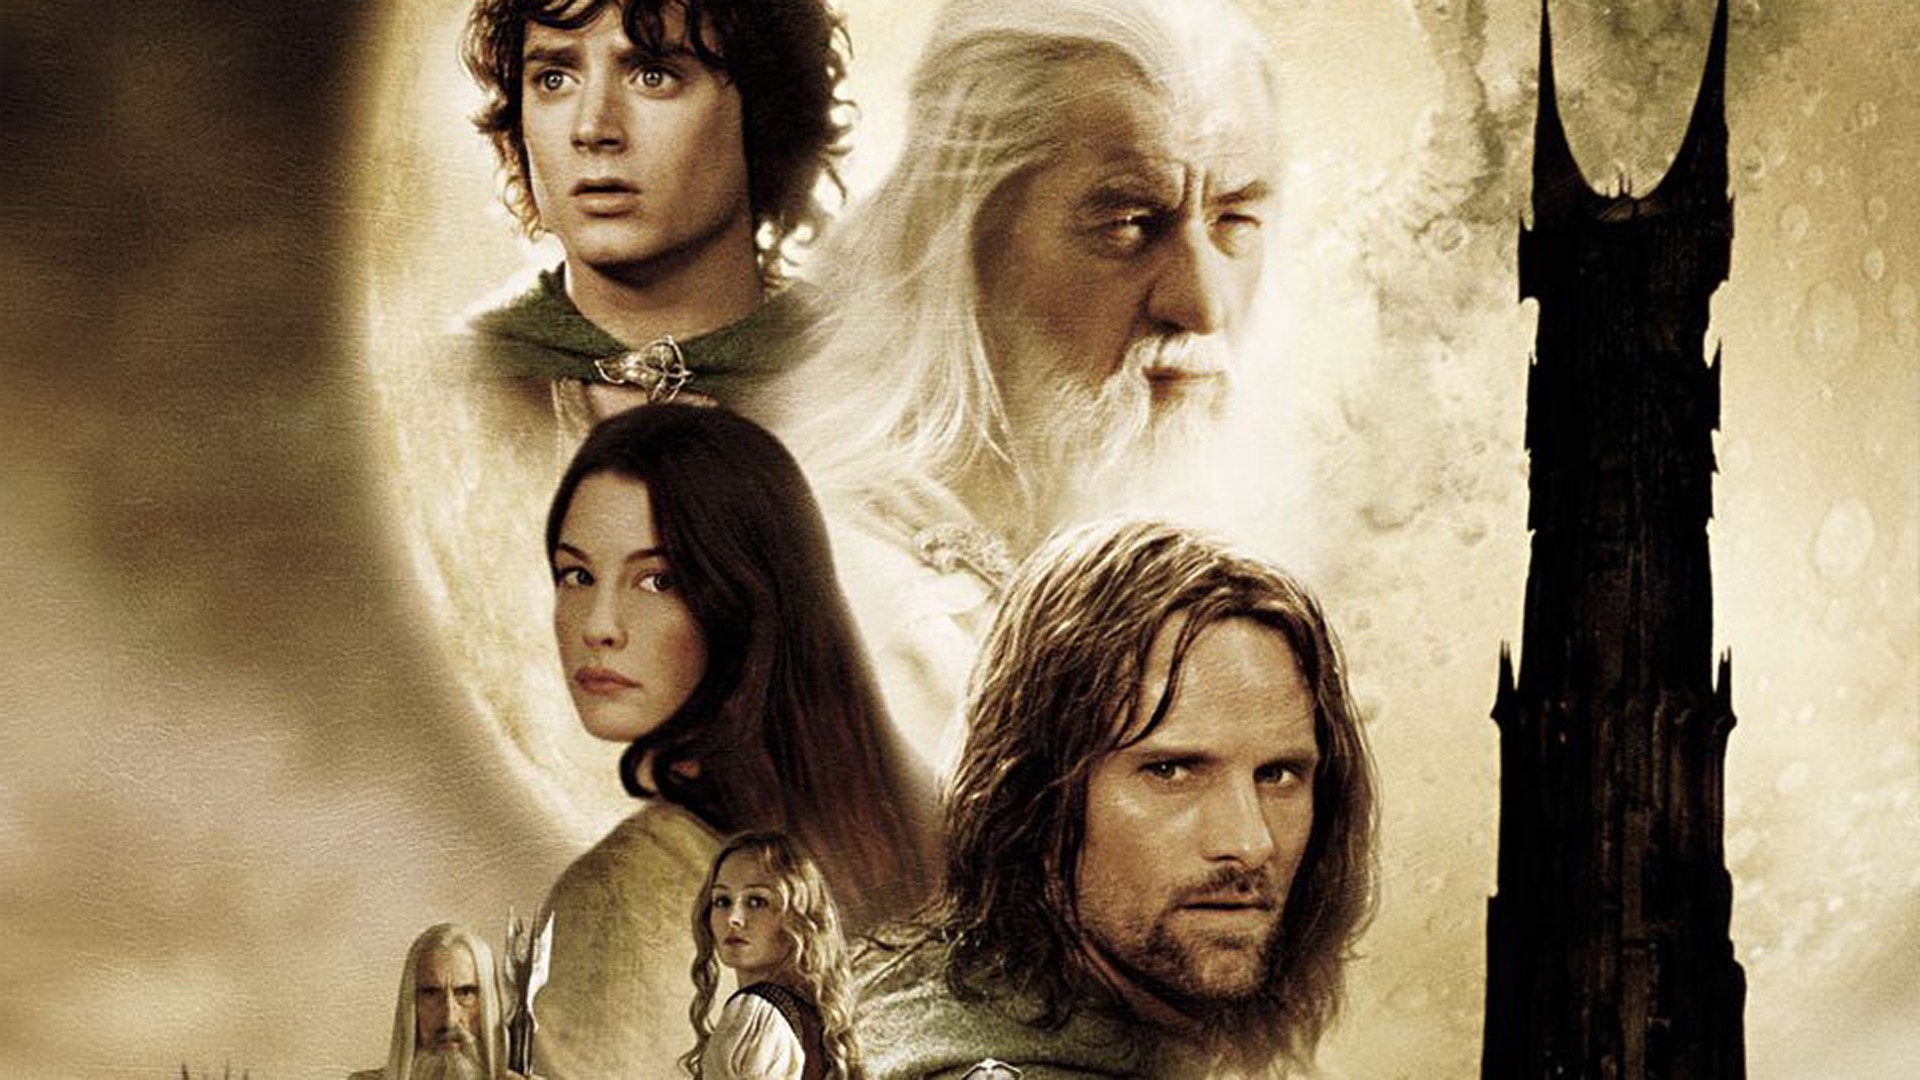 53589 Movies The Lord Of The Rings The Lord Of The Rings The Two Towers Frodo Baggins Gandalf Aragorn Arwen Éowyn Saruman Ian McKellen Viggo Mortensen Elijah Wood Liv Tyler Christopher Lee 